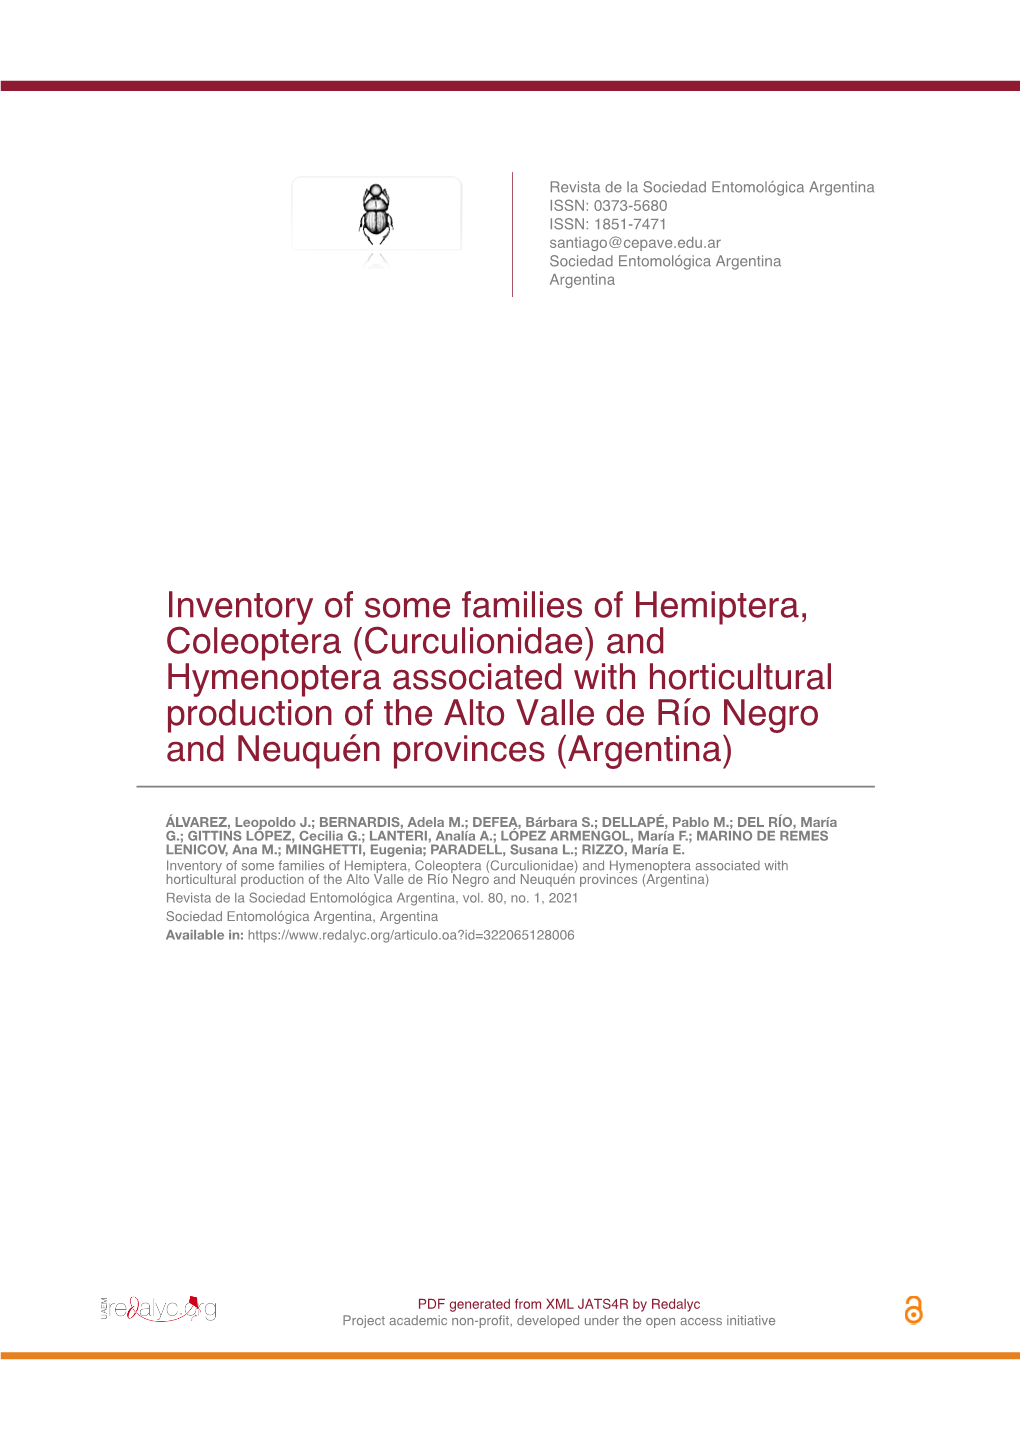 Inventory of Some Families of Hemiptera, Coleoptera (Curculionidae) and Hymenoptera Associated with Horticultural Production Of